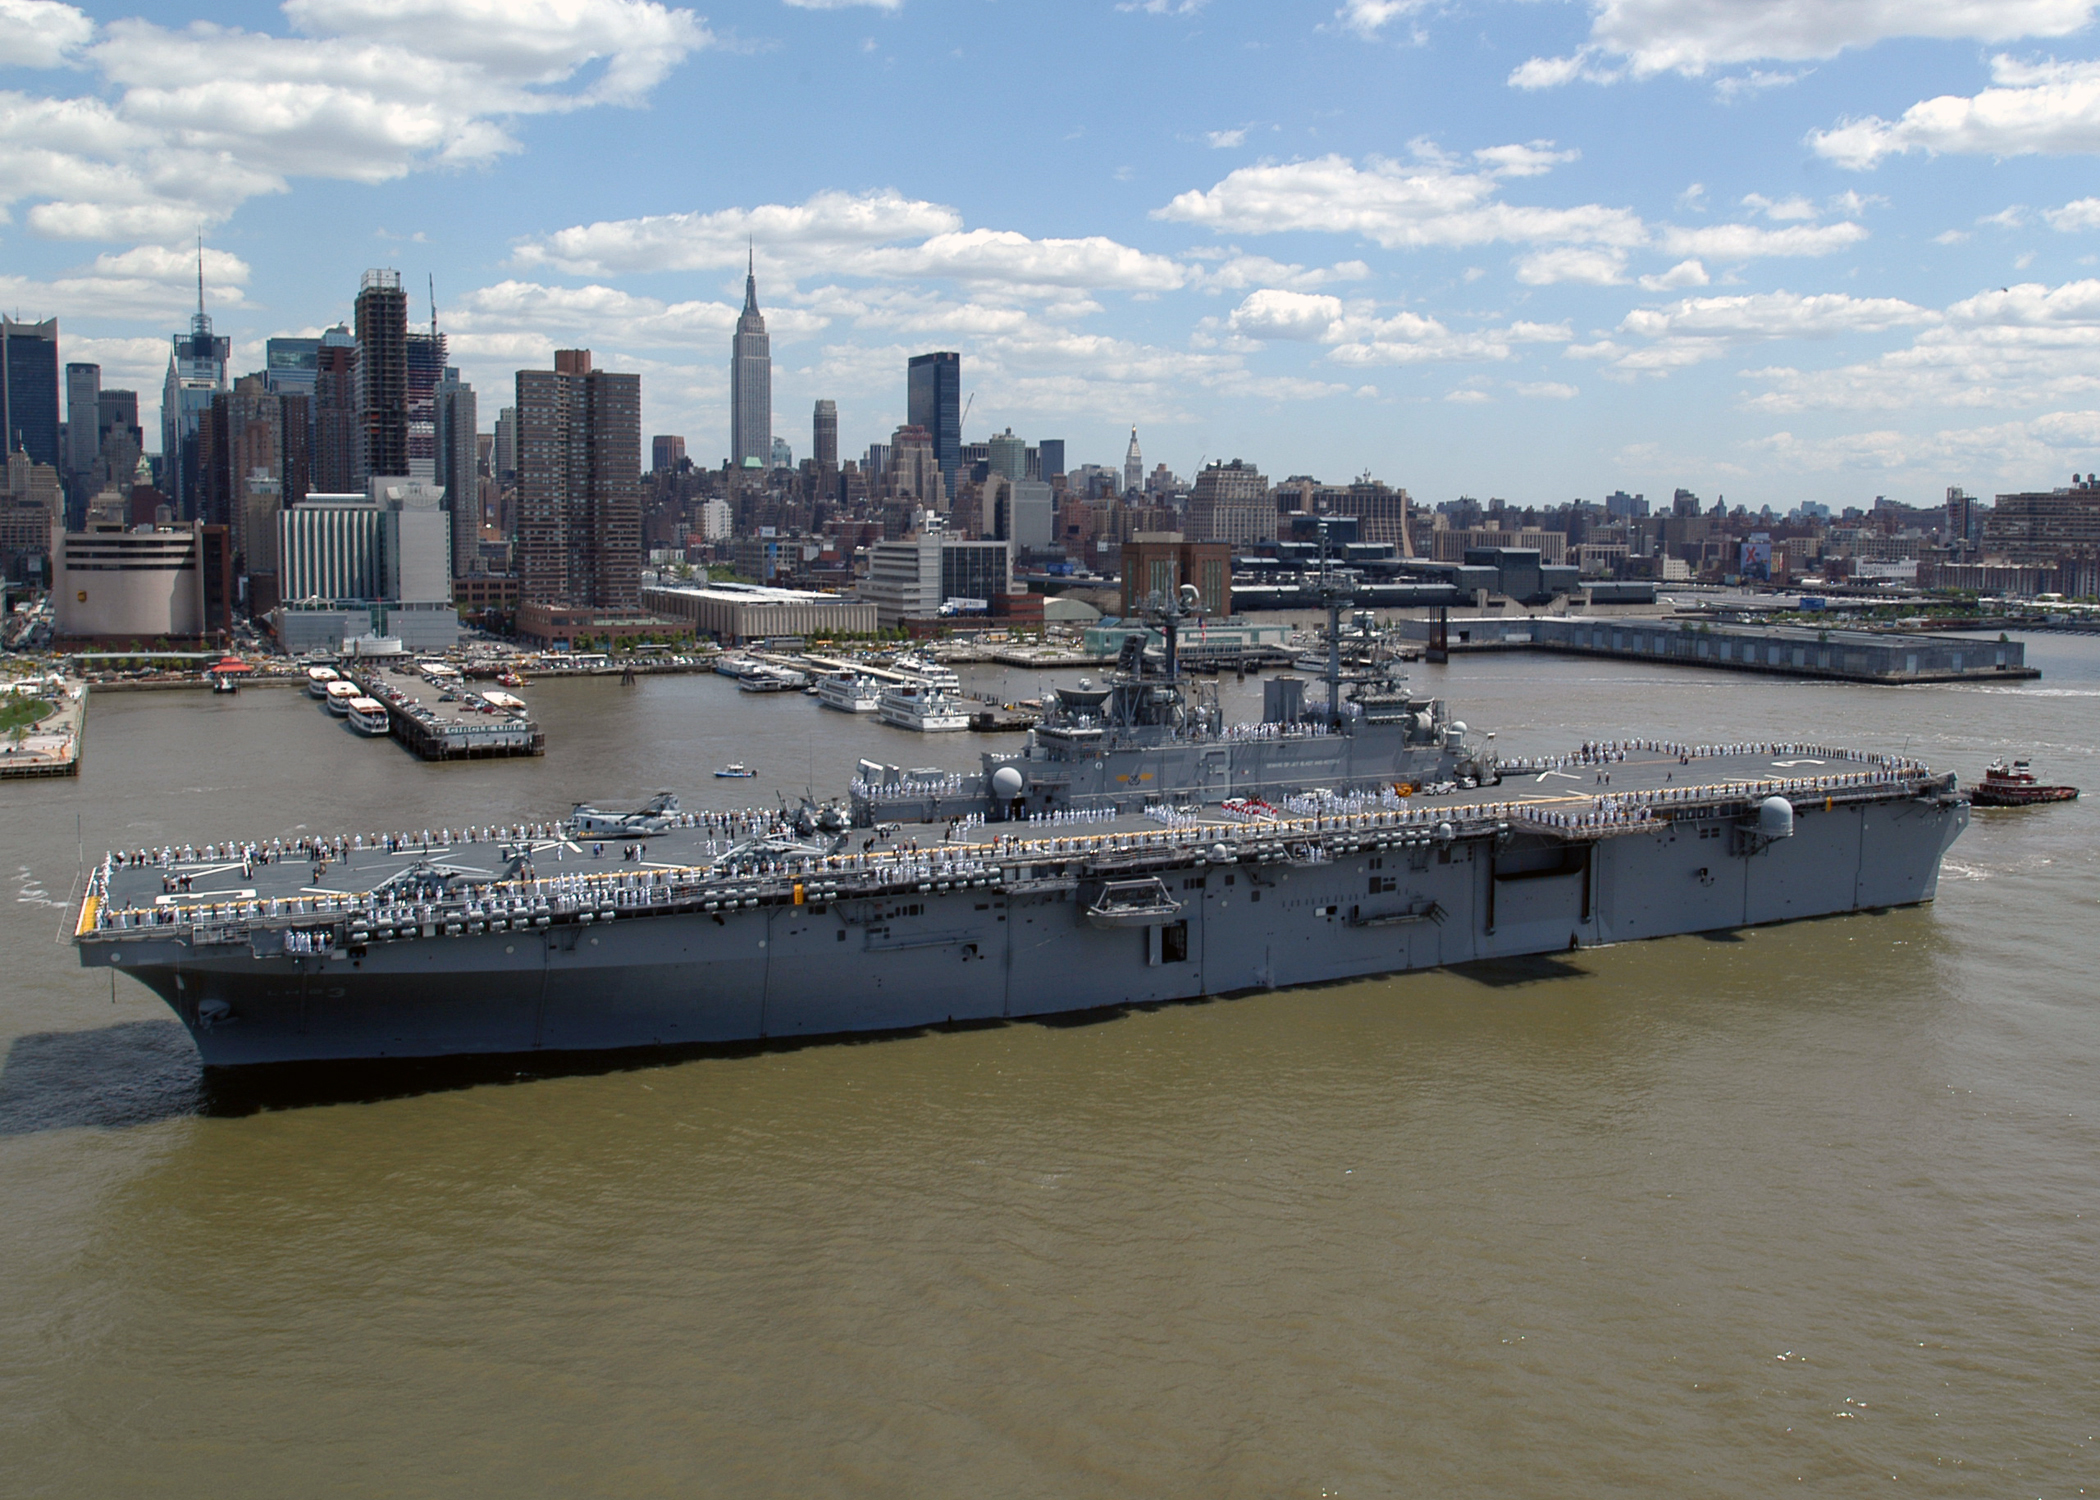 The USS Kearsarge. U.S. Navy photo by Mass Communication Specialist 1st Class Aaron Glover